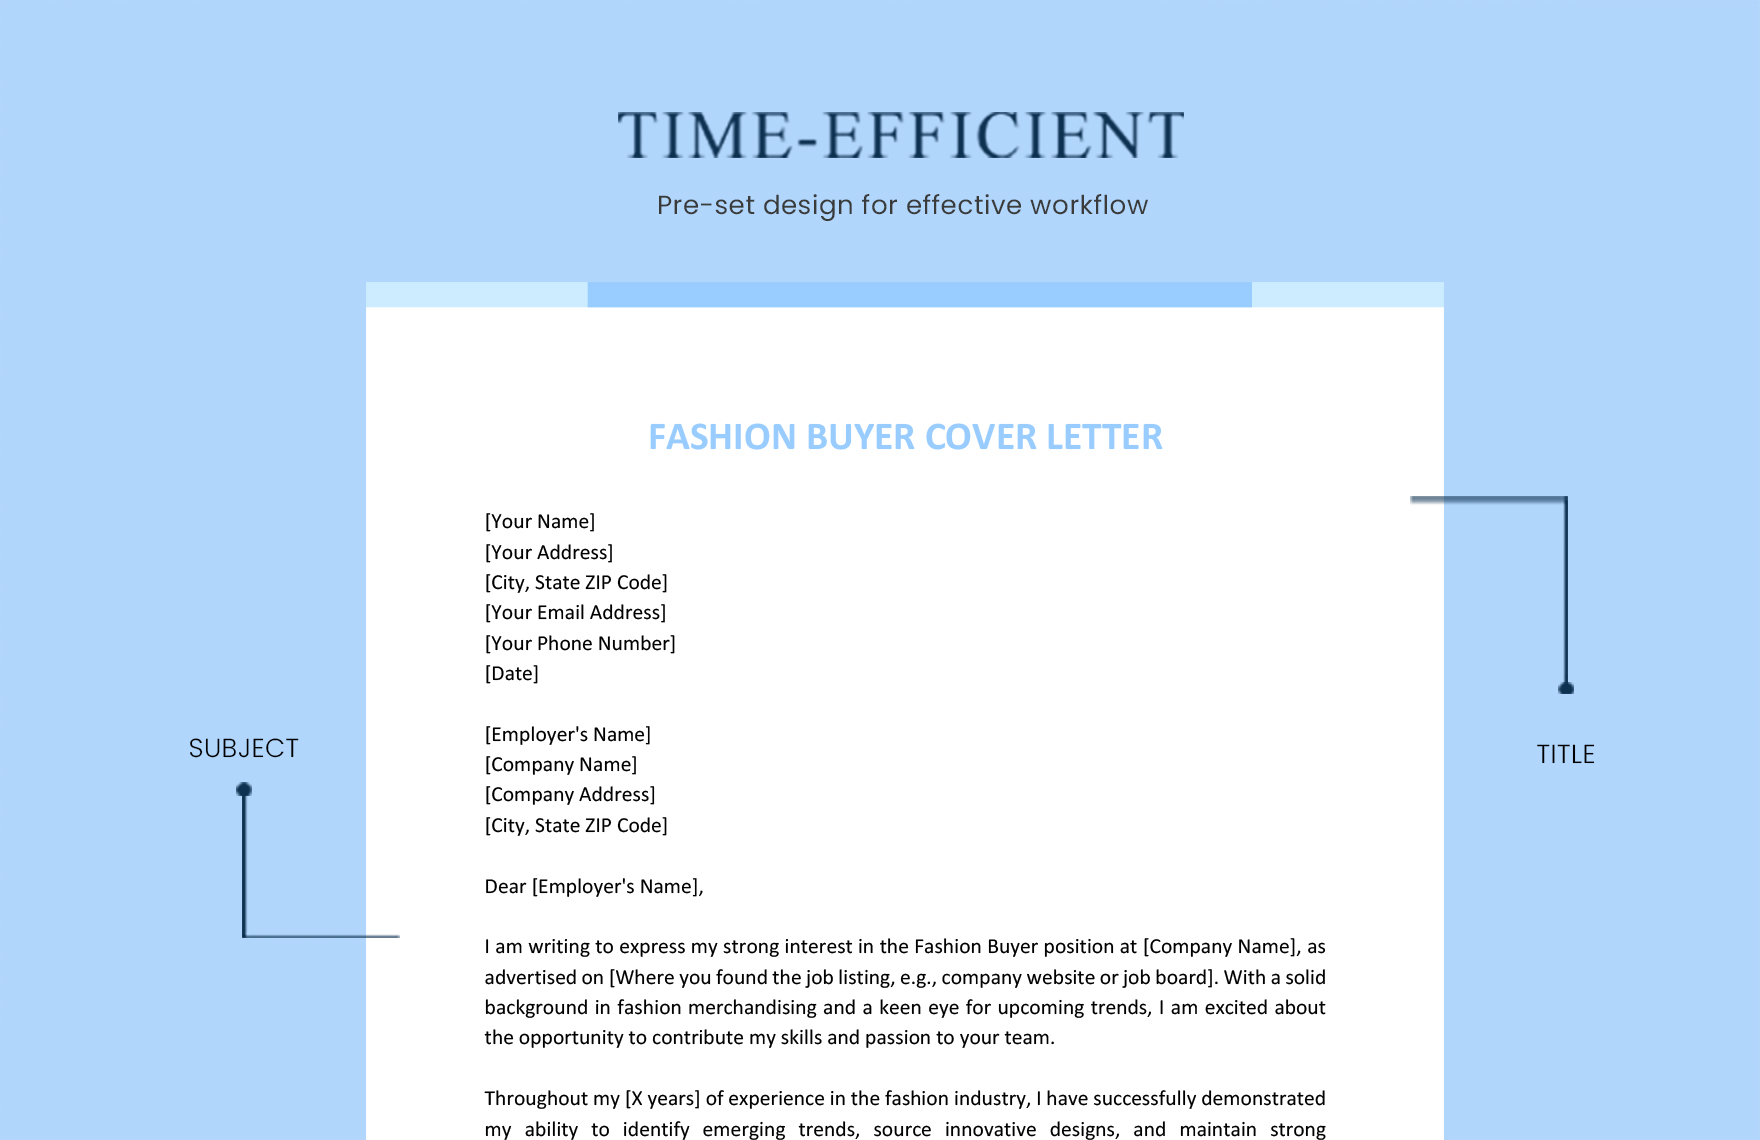 Fashion Buyer Cover Letter